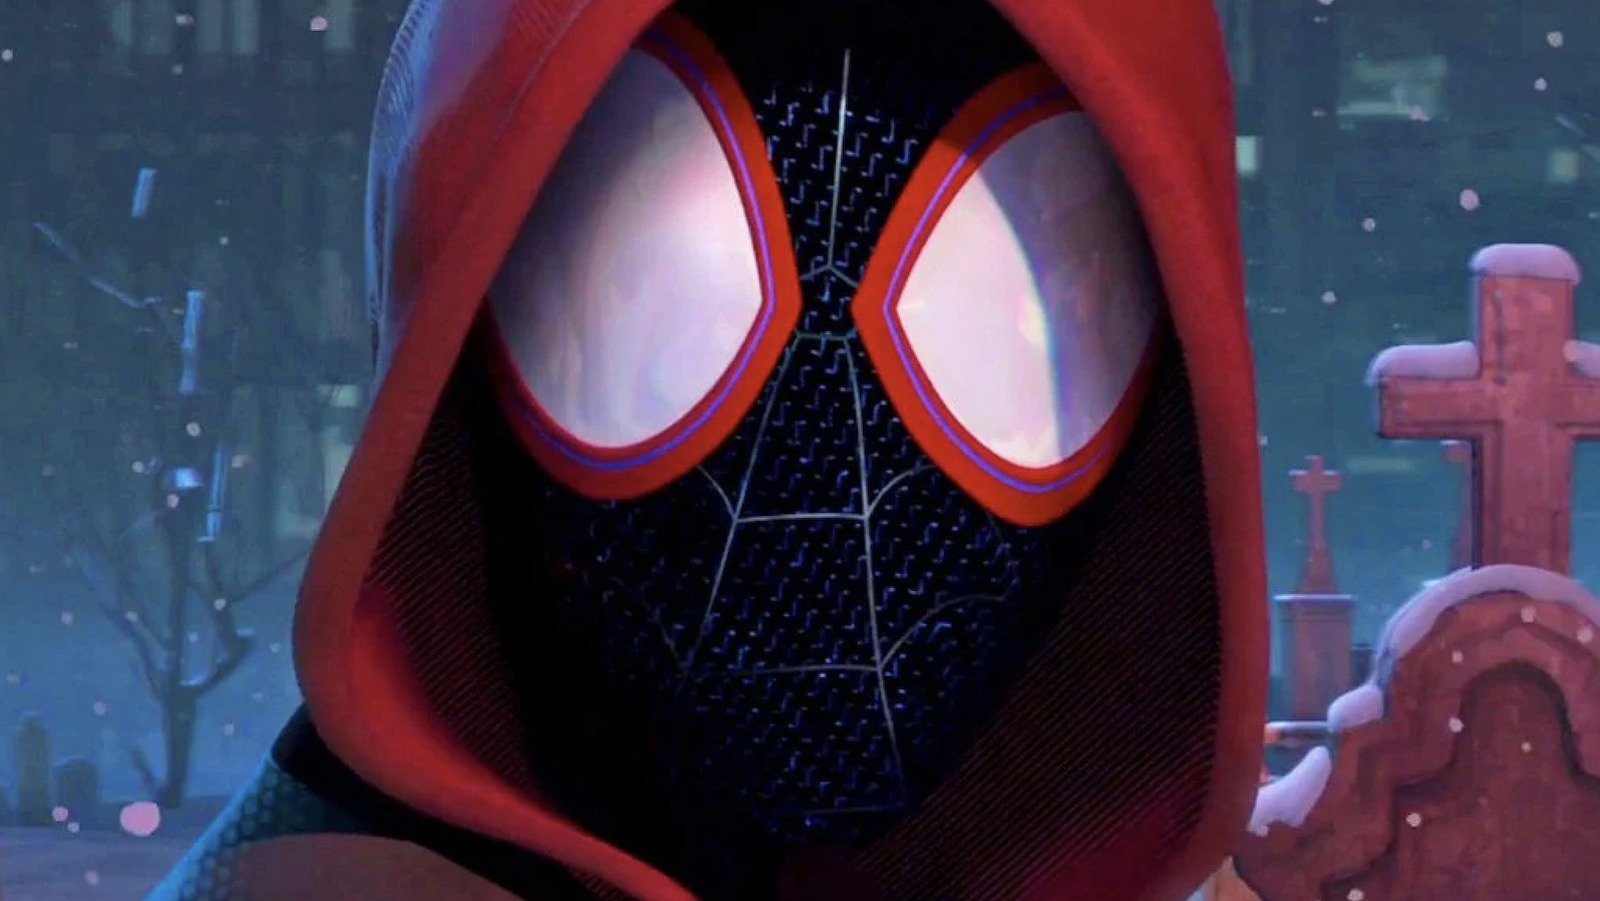 SPIDER-MAN: ACROSS THE SPIDER-VERSE, (aka SPIDER-MAN: ACROSS THE